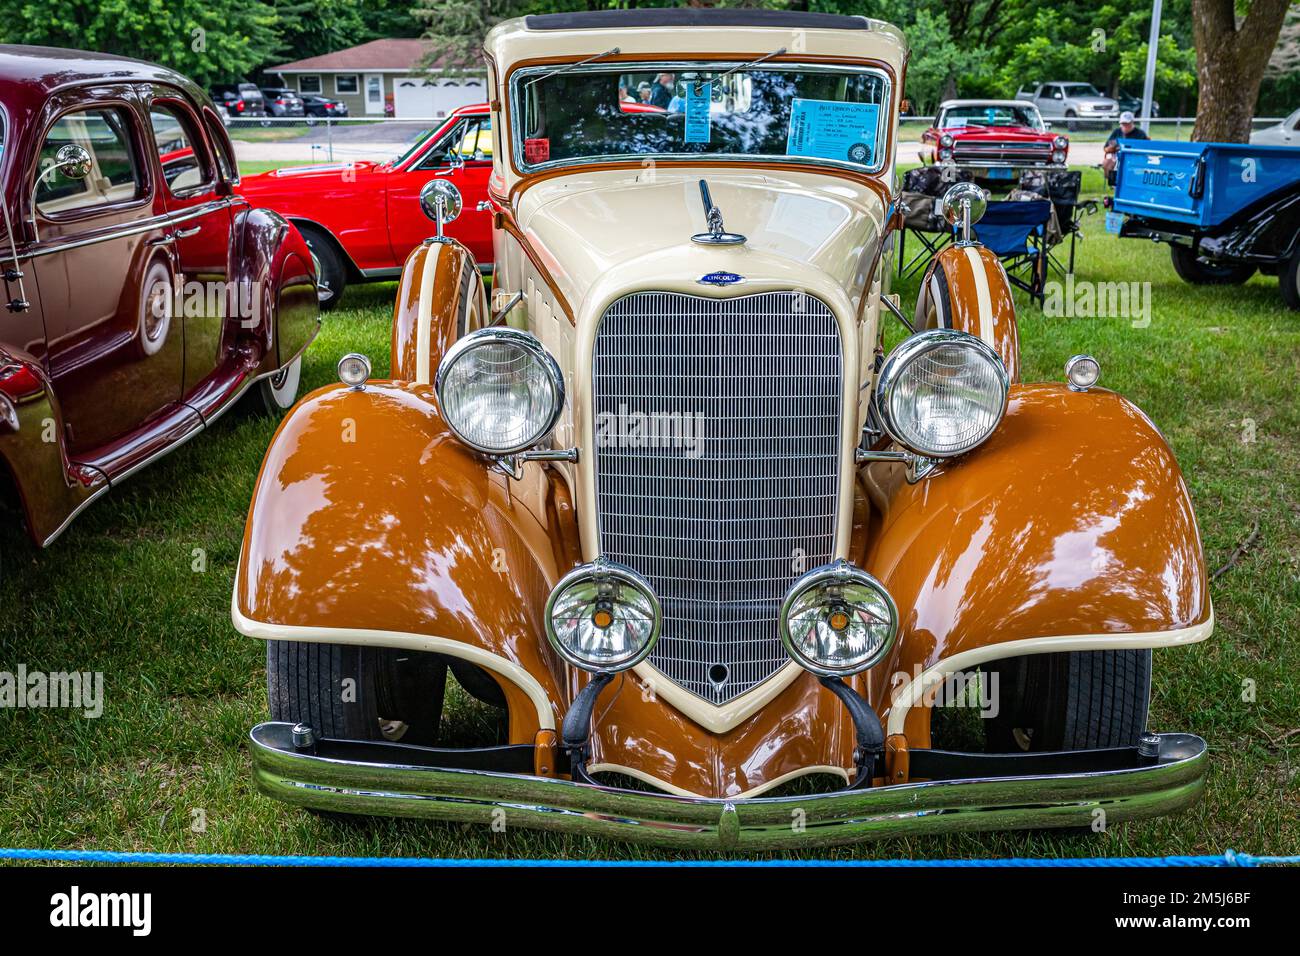 Iola, WI - July 07, 2022: High perspective front view of a 1934 Lincoln Model KB Seven Passenger Limousine at a local car show. Stock Photo